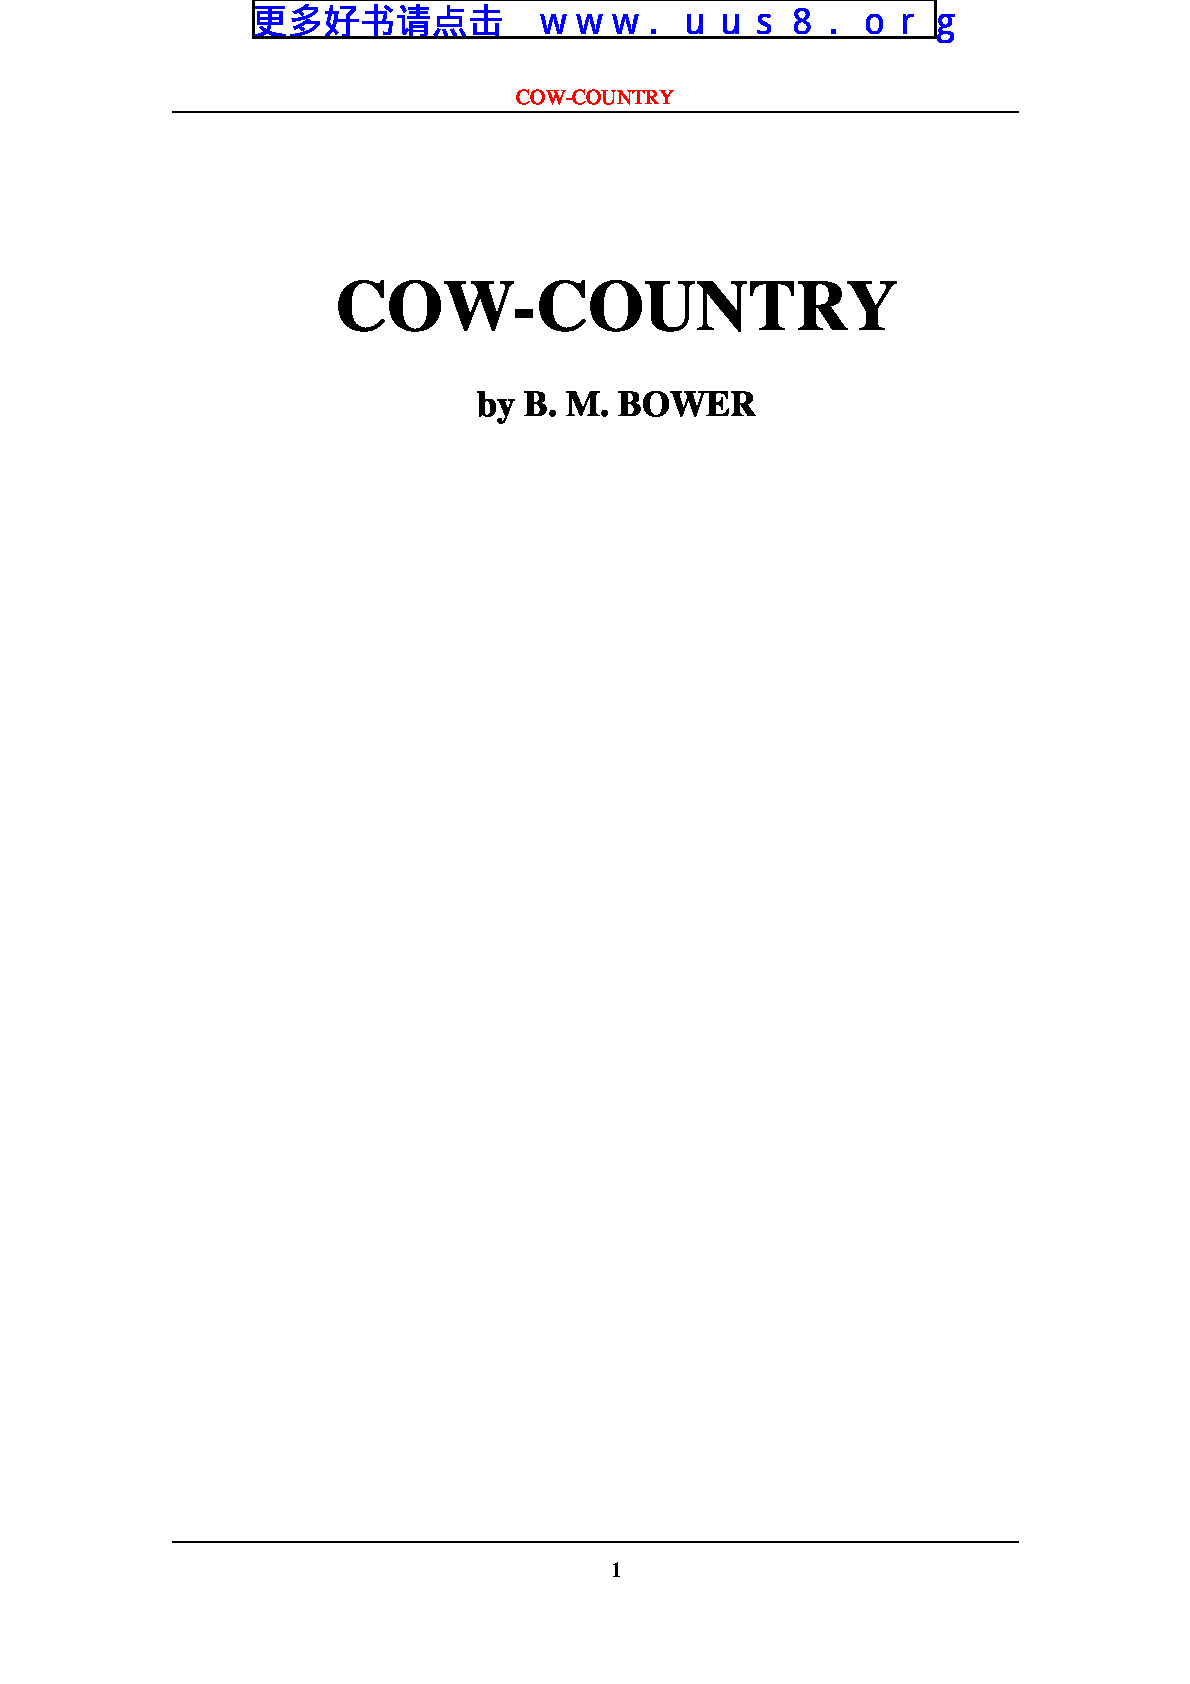 COW-COUNTRY(牛乡)